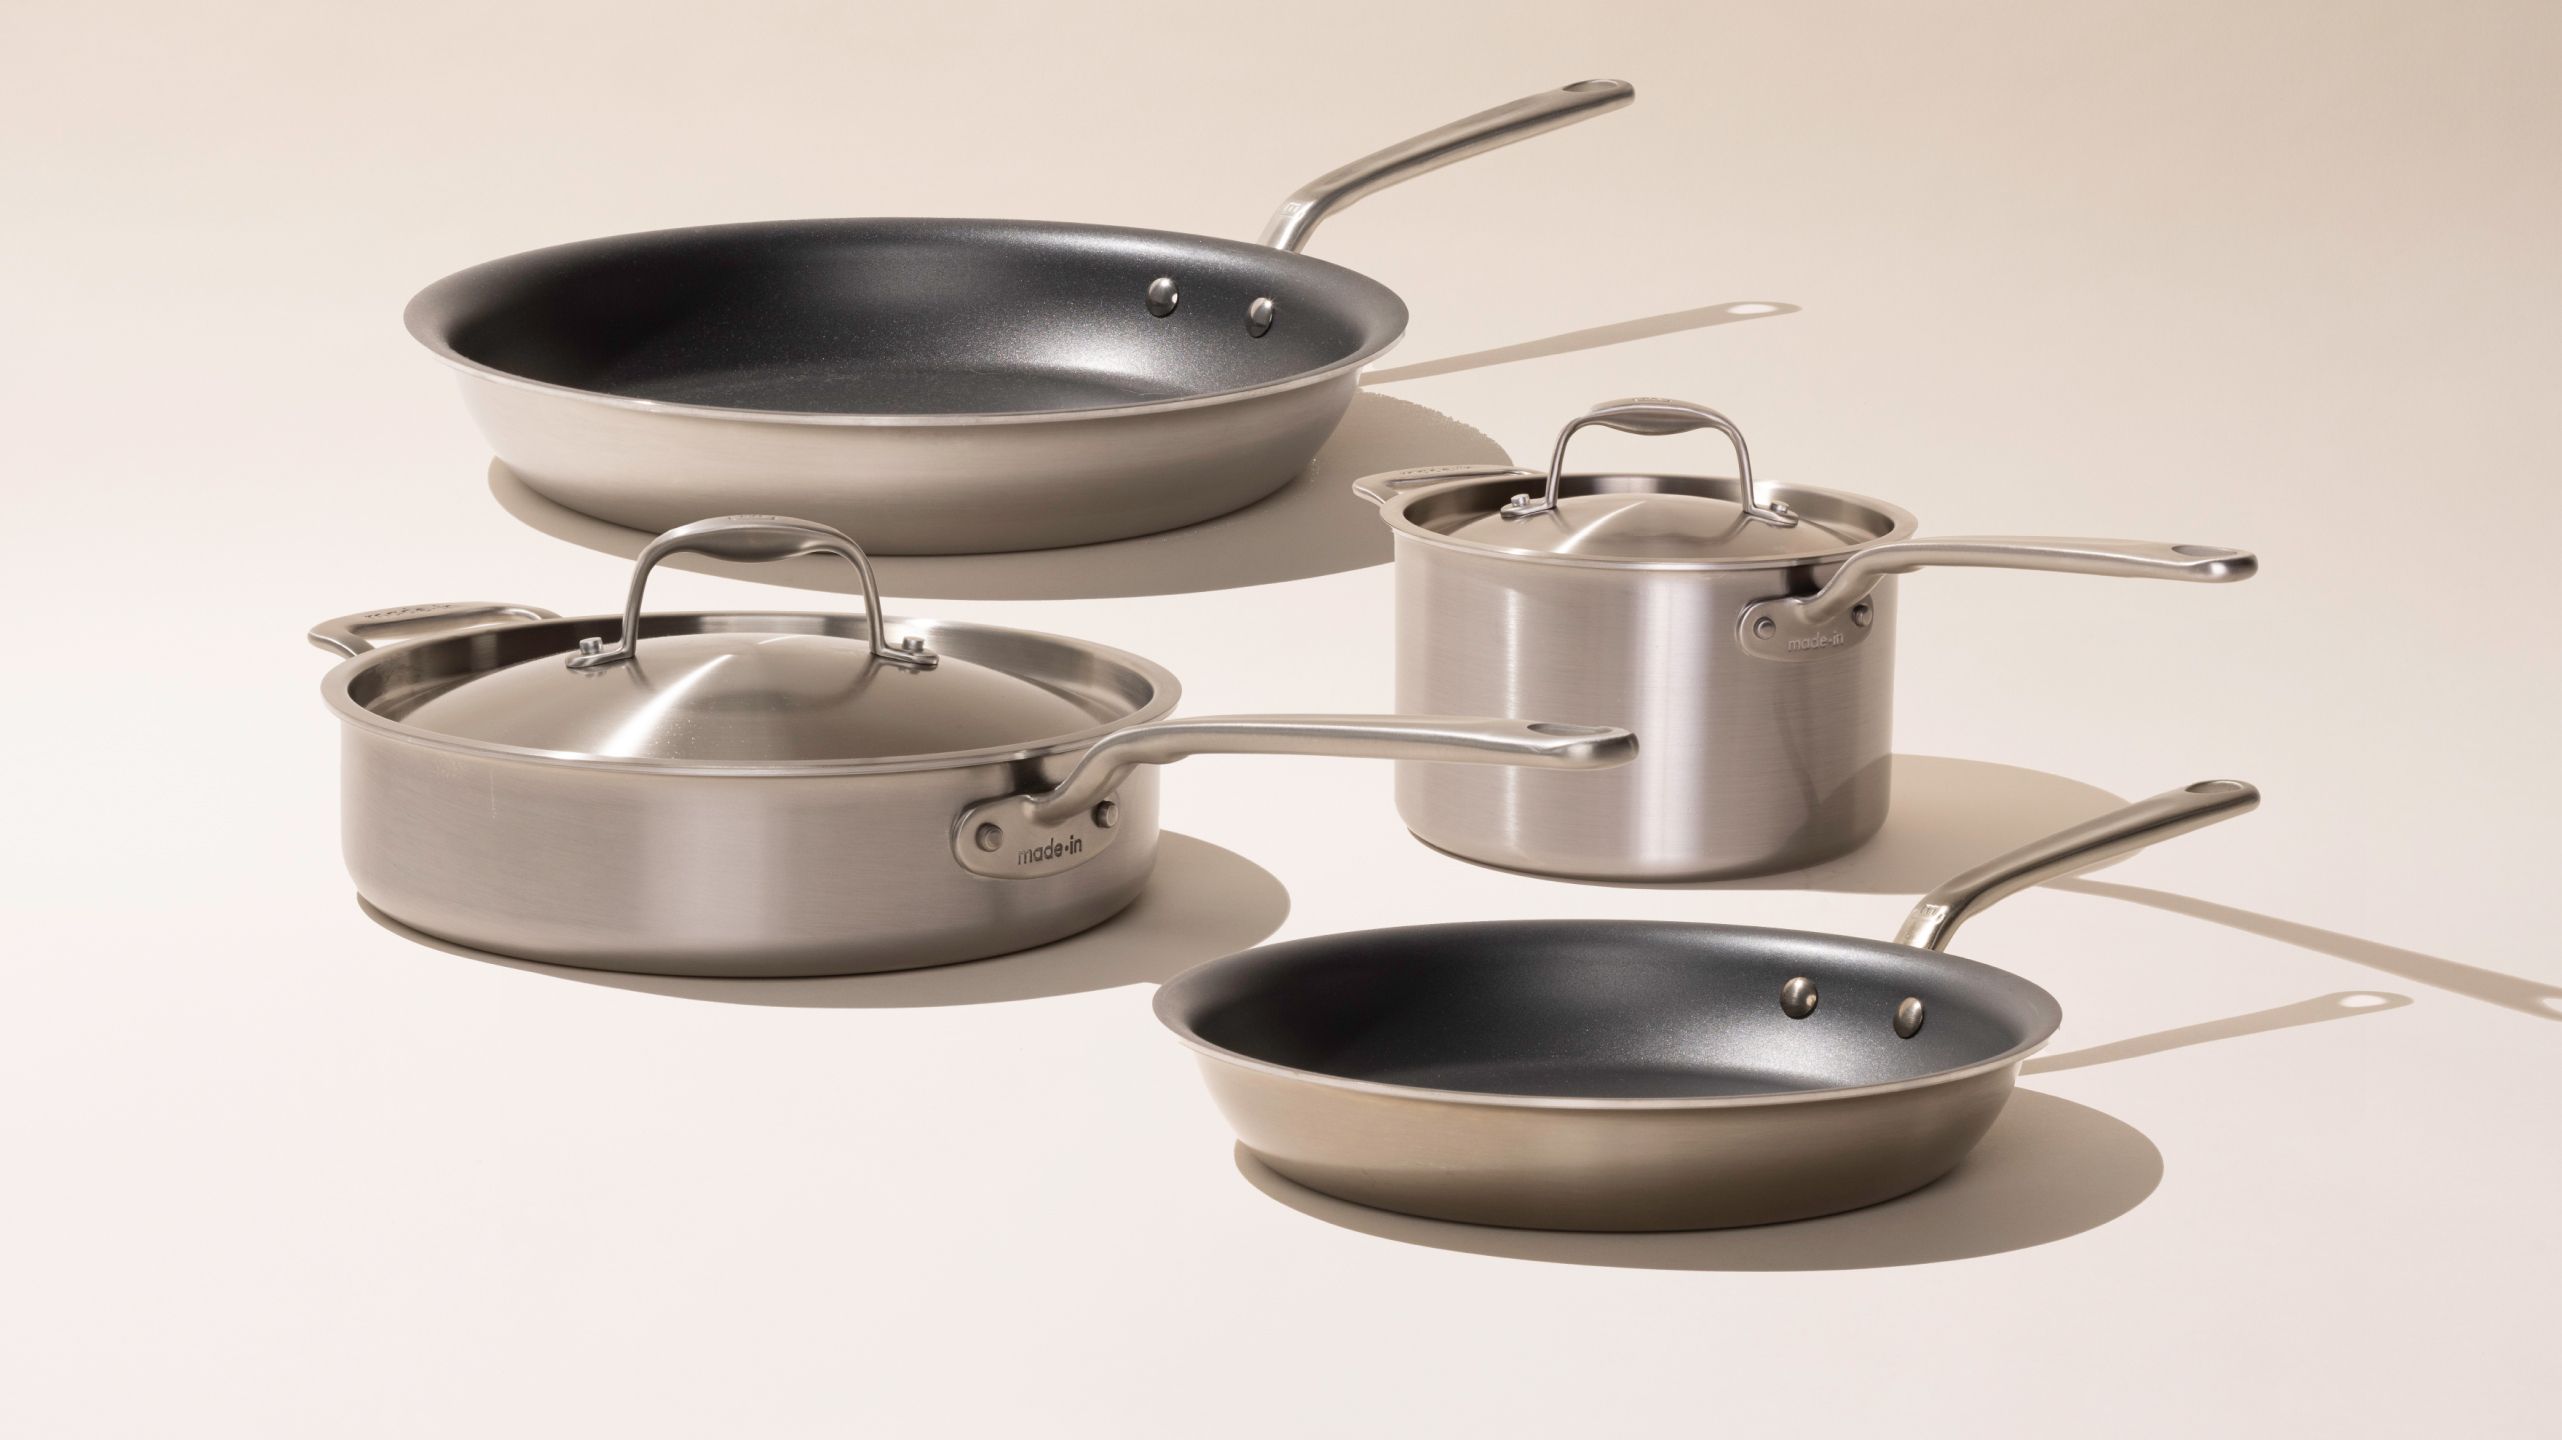 7 Piece Cookware Set • Your Guide to American Made Products